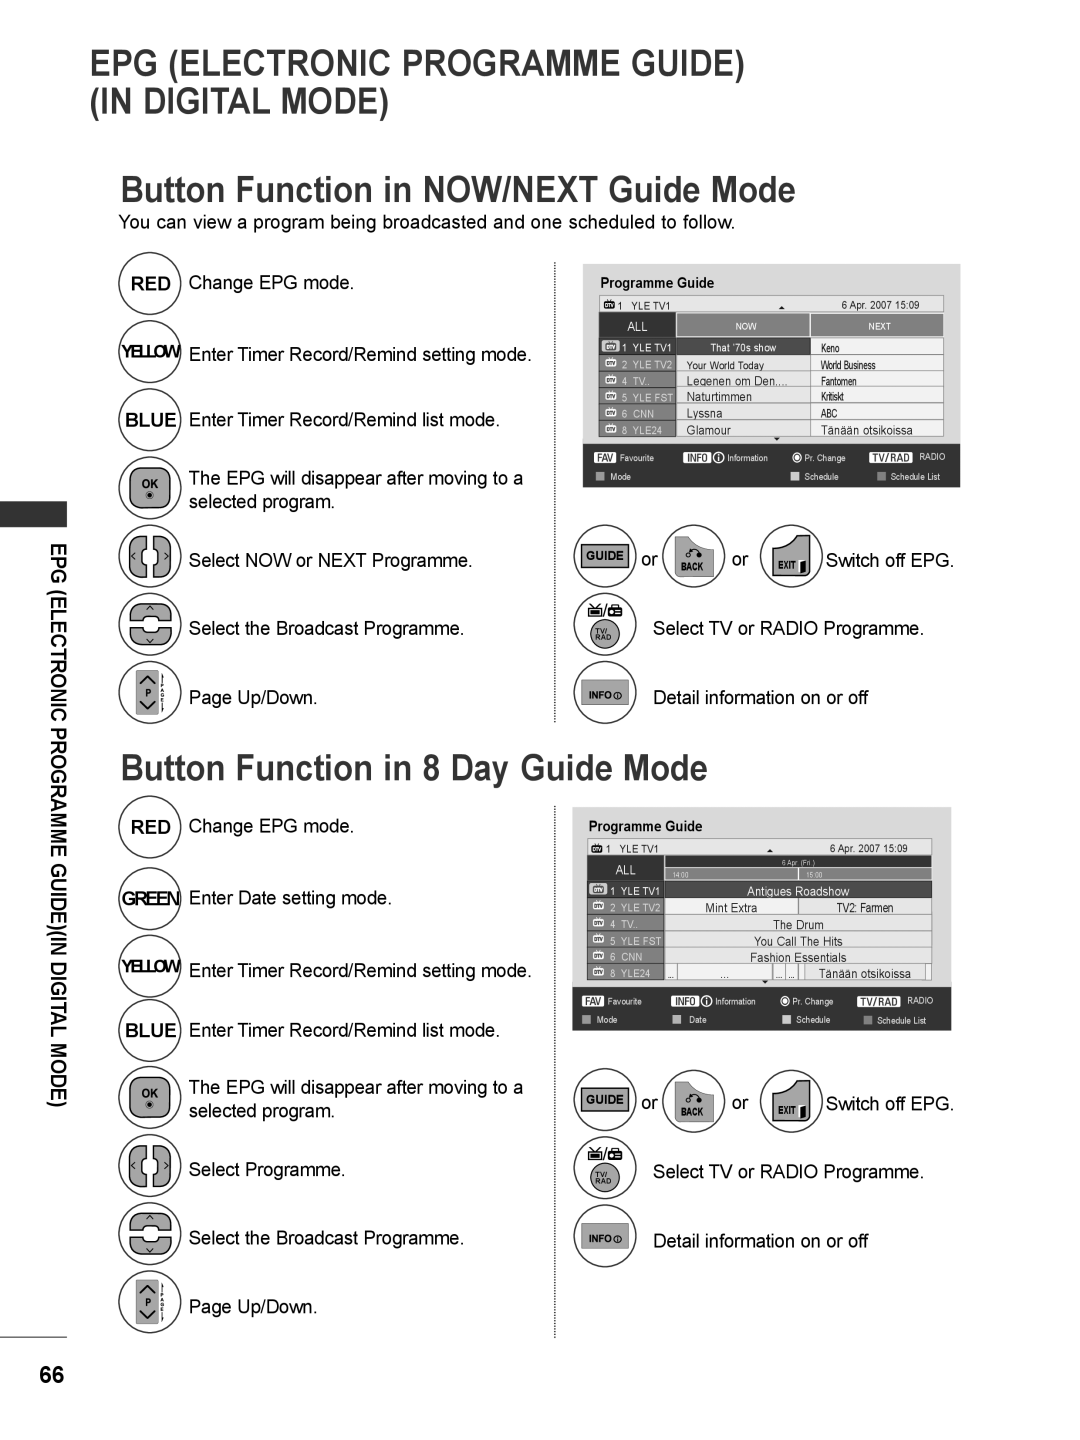 LG Electronics M2280DN, M2780DF Epg Electronic Programme Guide In Digital Mode, Button Function in NOW/NEXT Guide Mode 